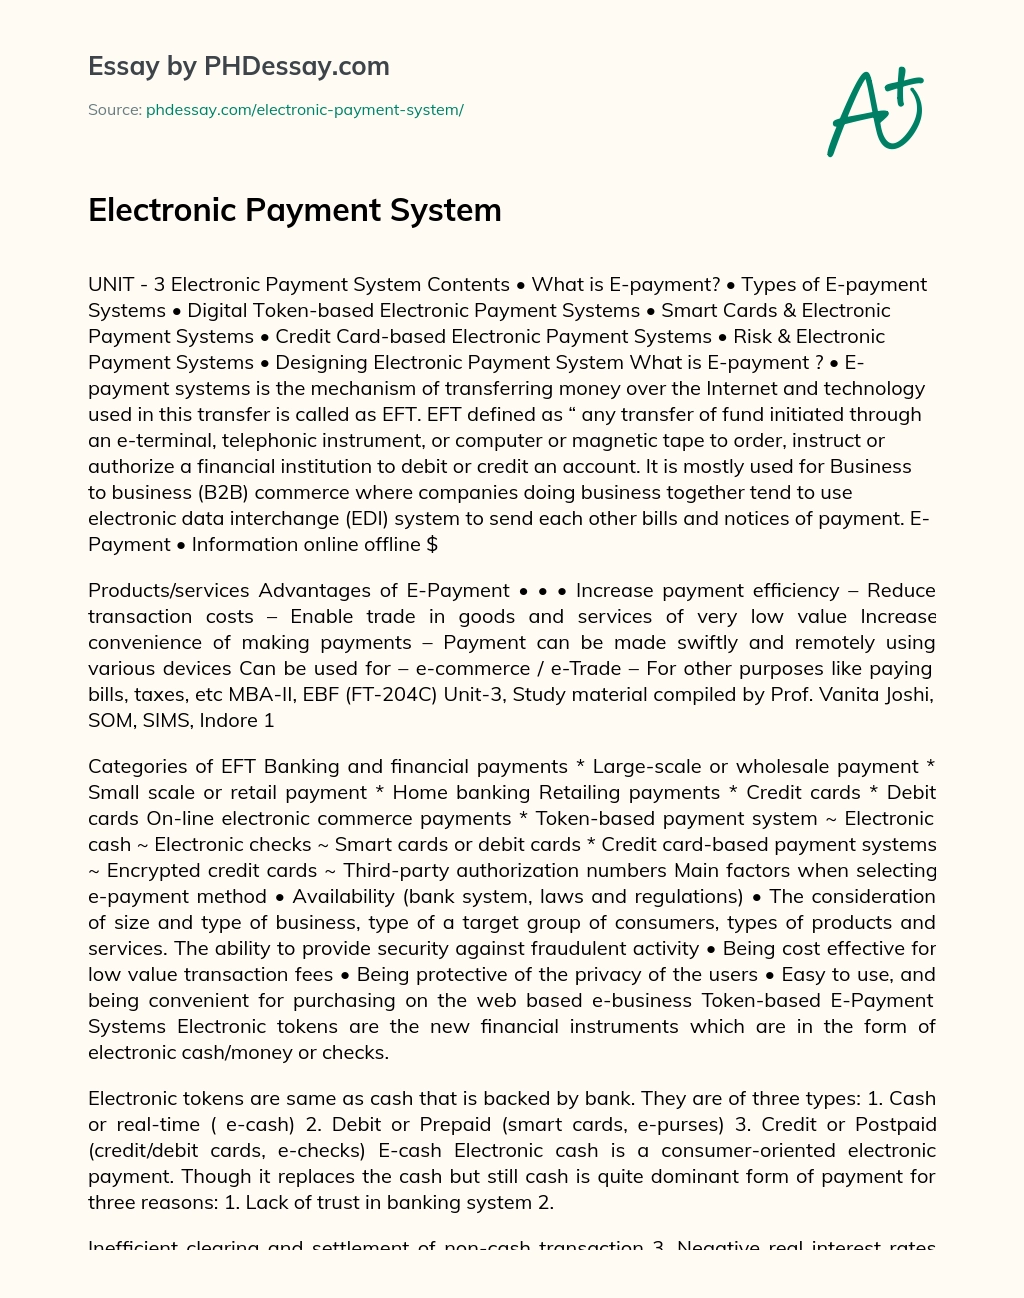 Electronic Payment System essay